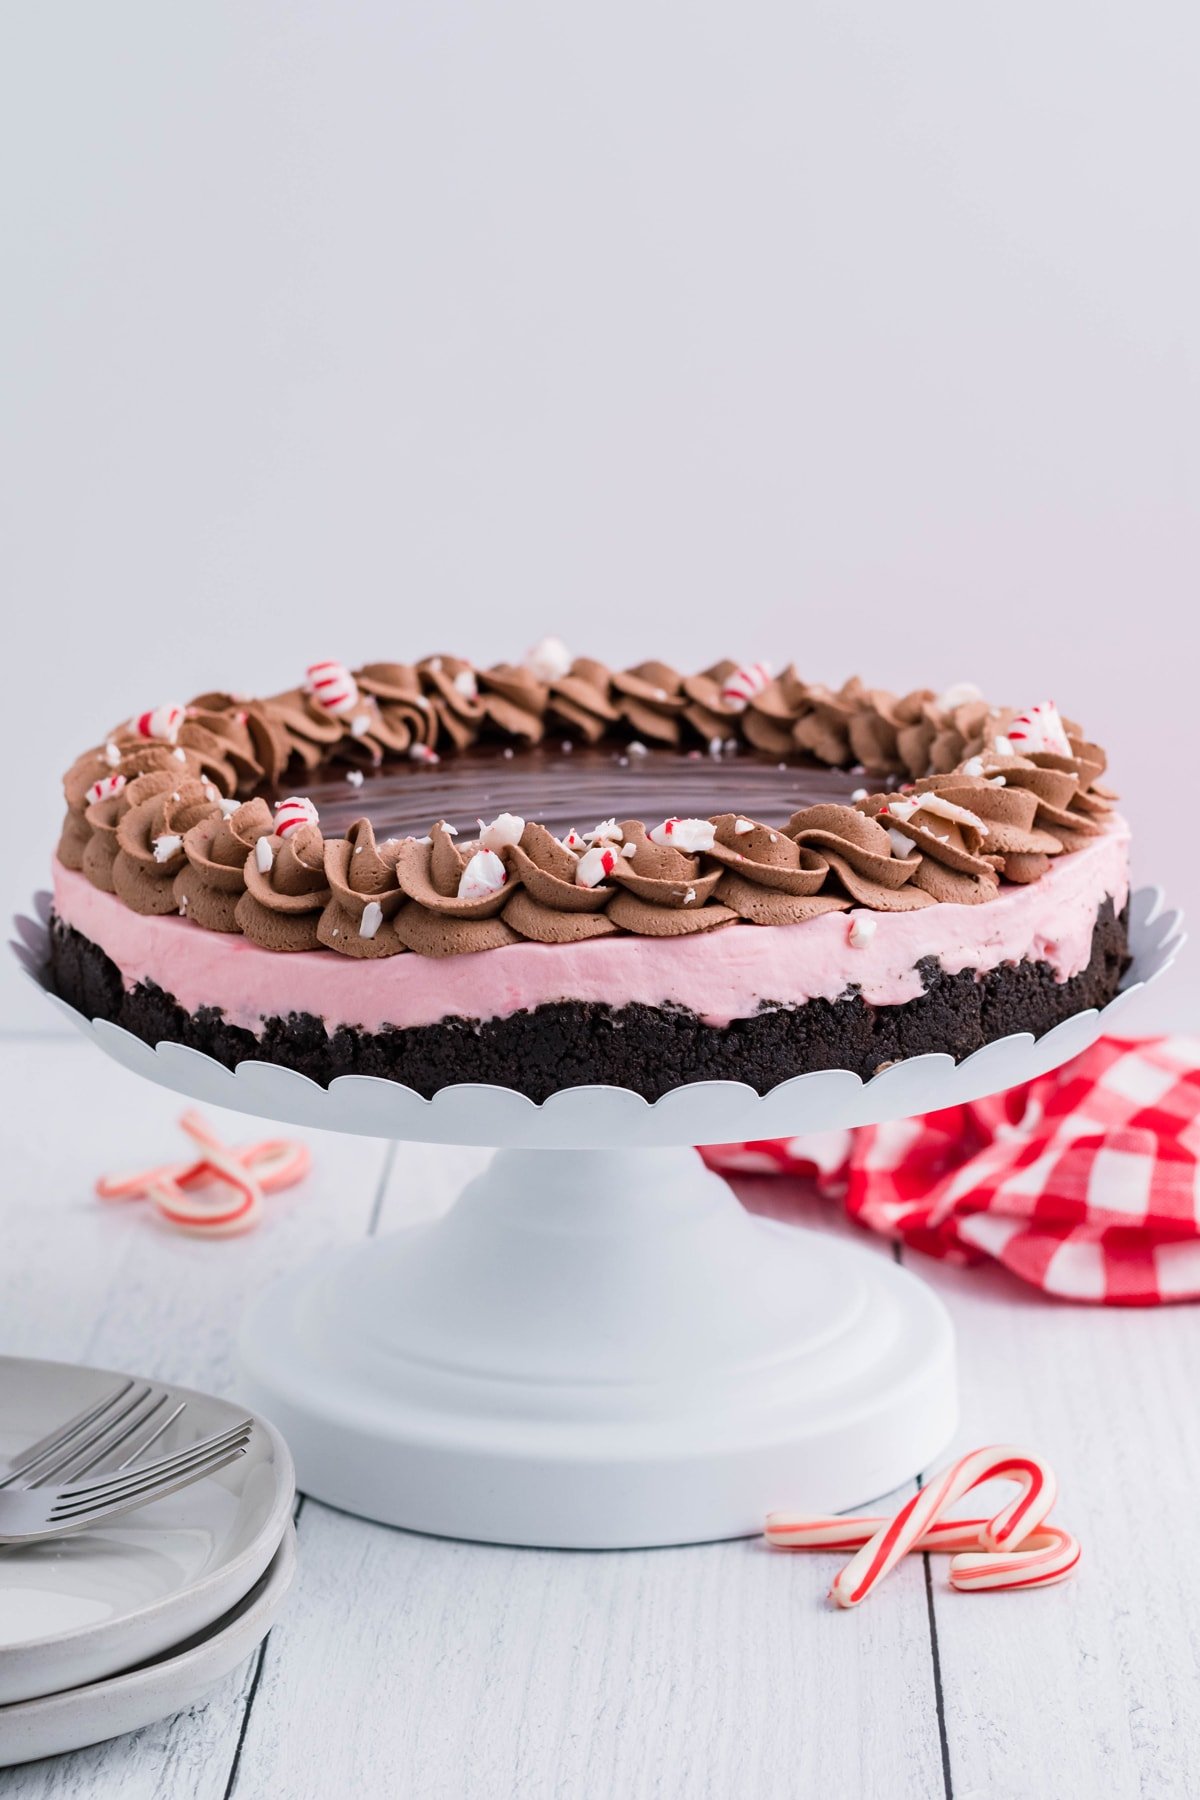 Peppermint cheesecake on a cake stand